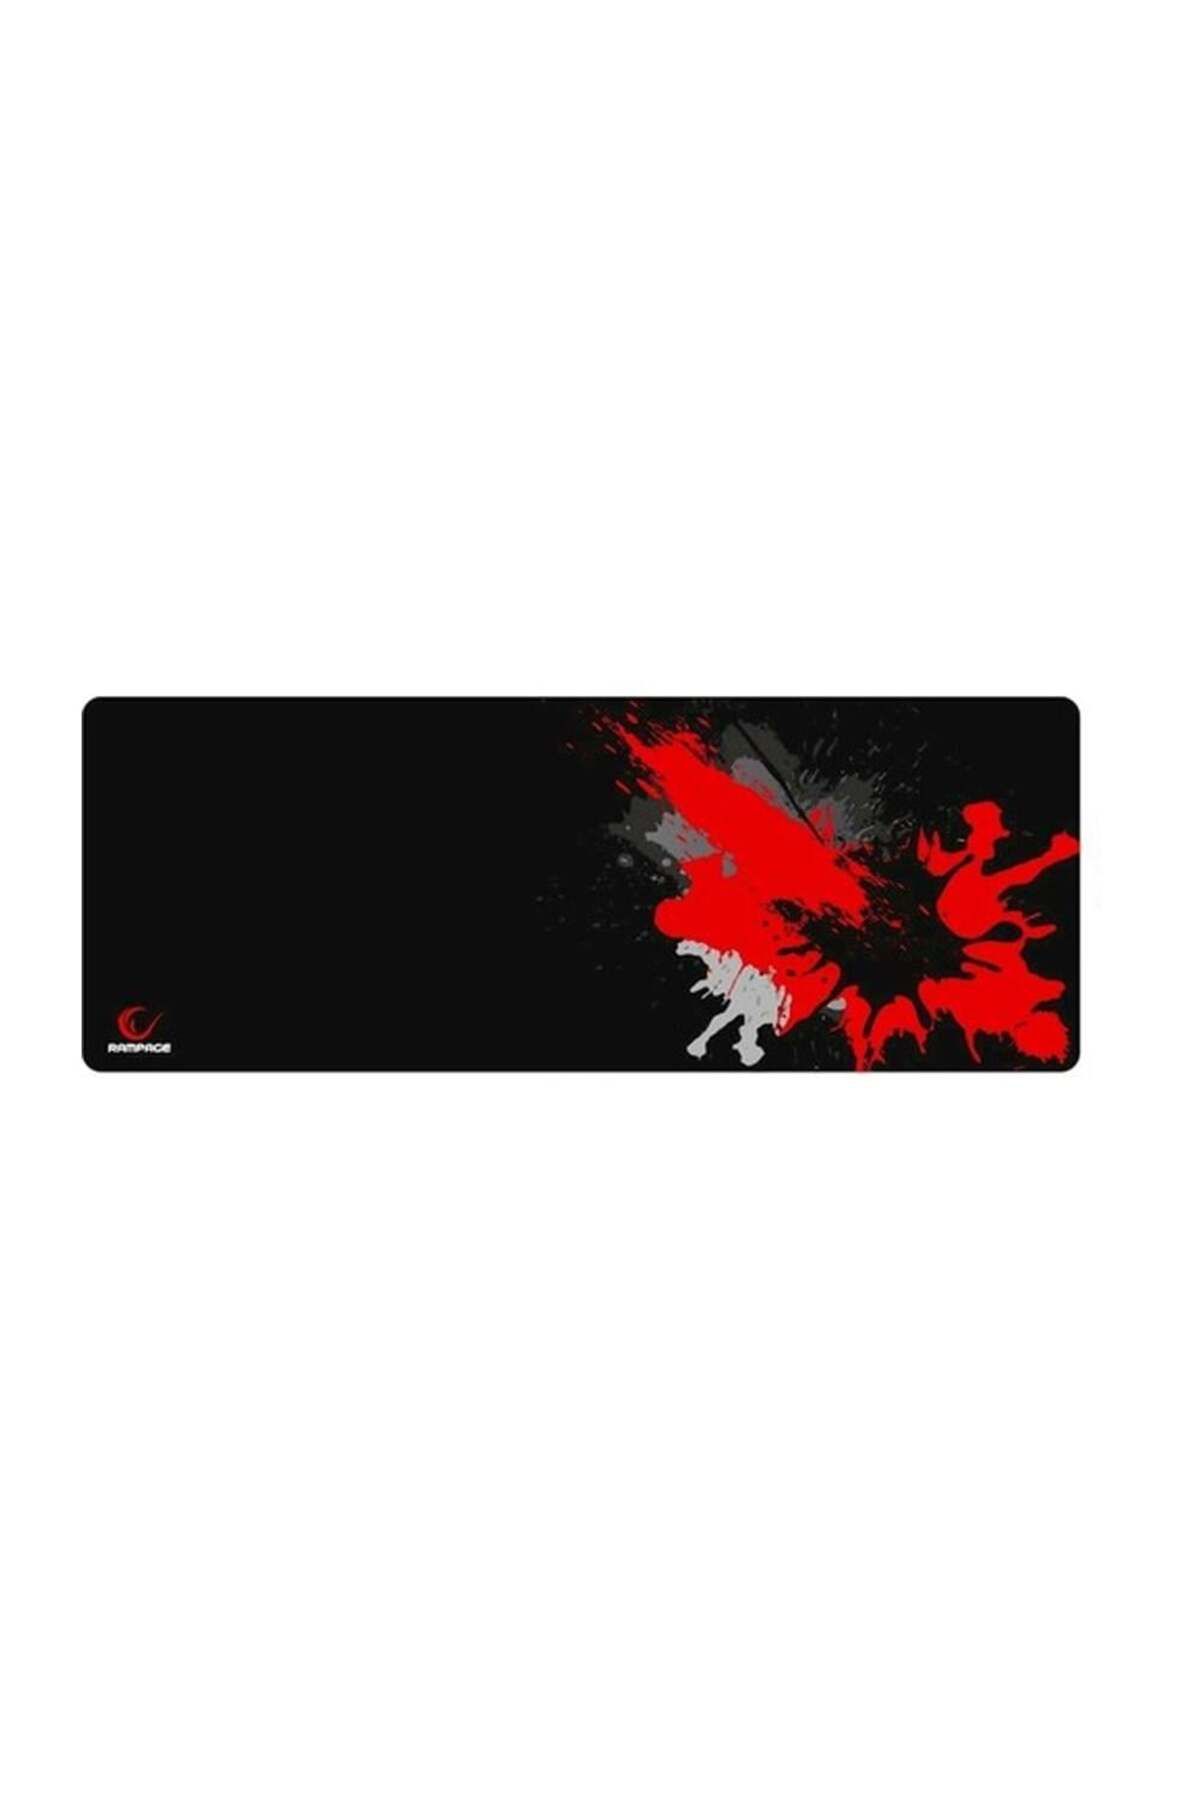 Rampage Addıson Combat Zone Xl 800*300*4 Mm Gaming Mouse Pad